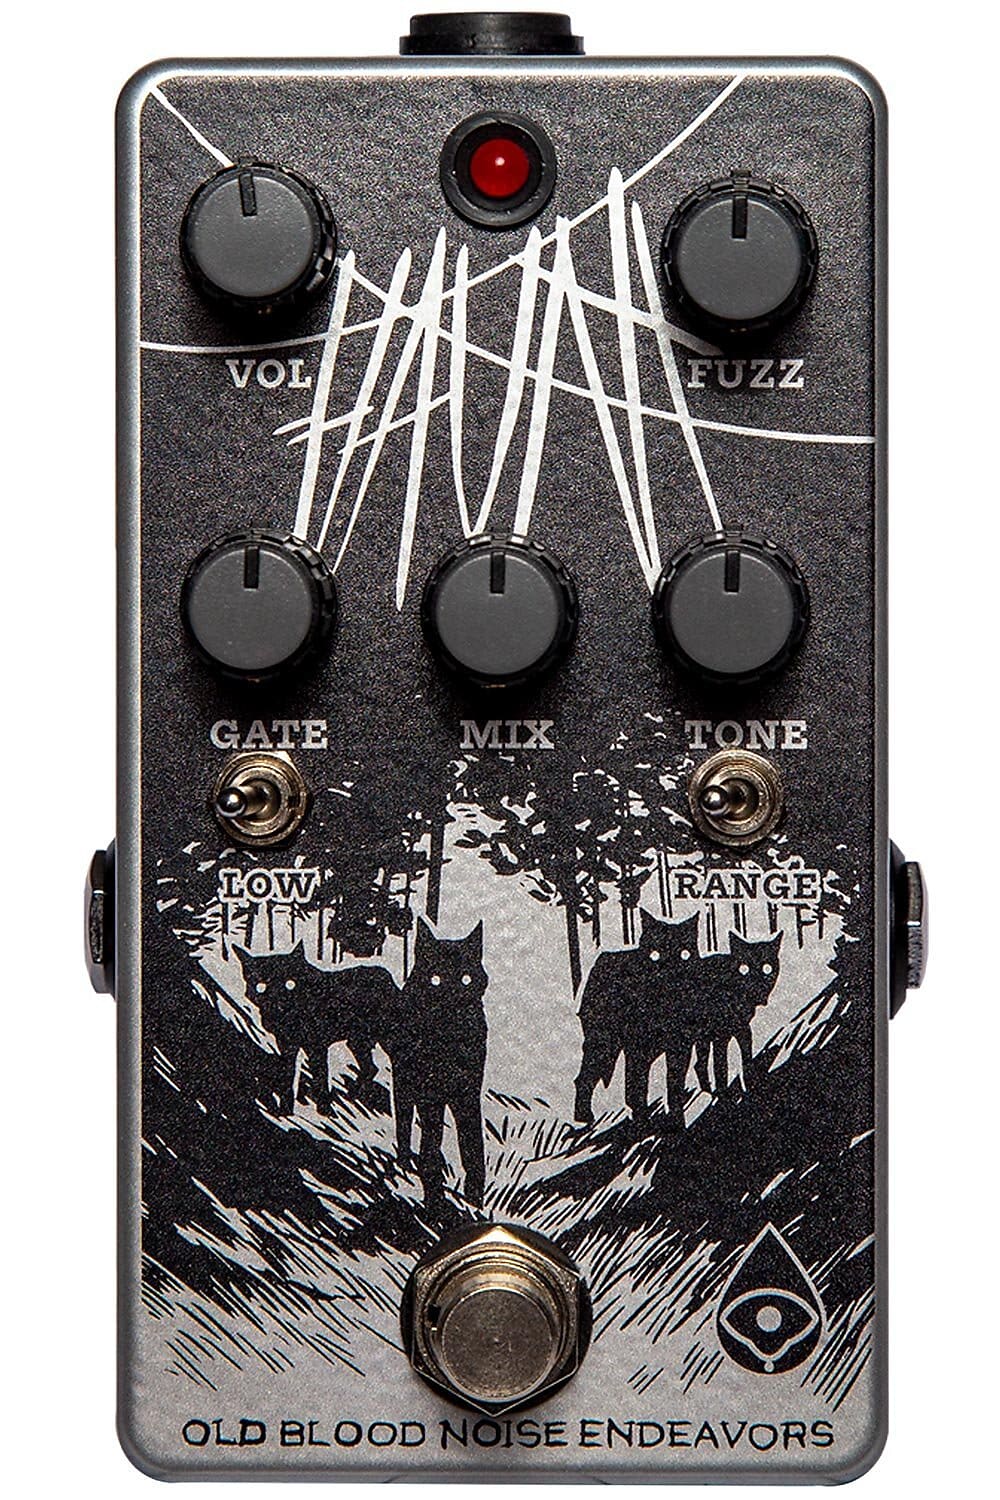 Old Blood Noise Endeavors Haunt w/Clickless Updated Gate Fuzz